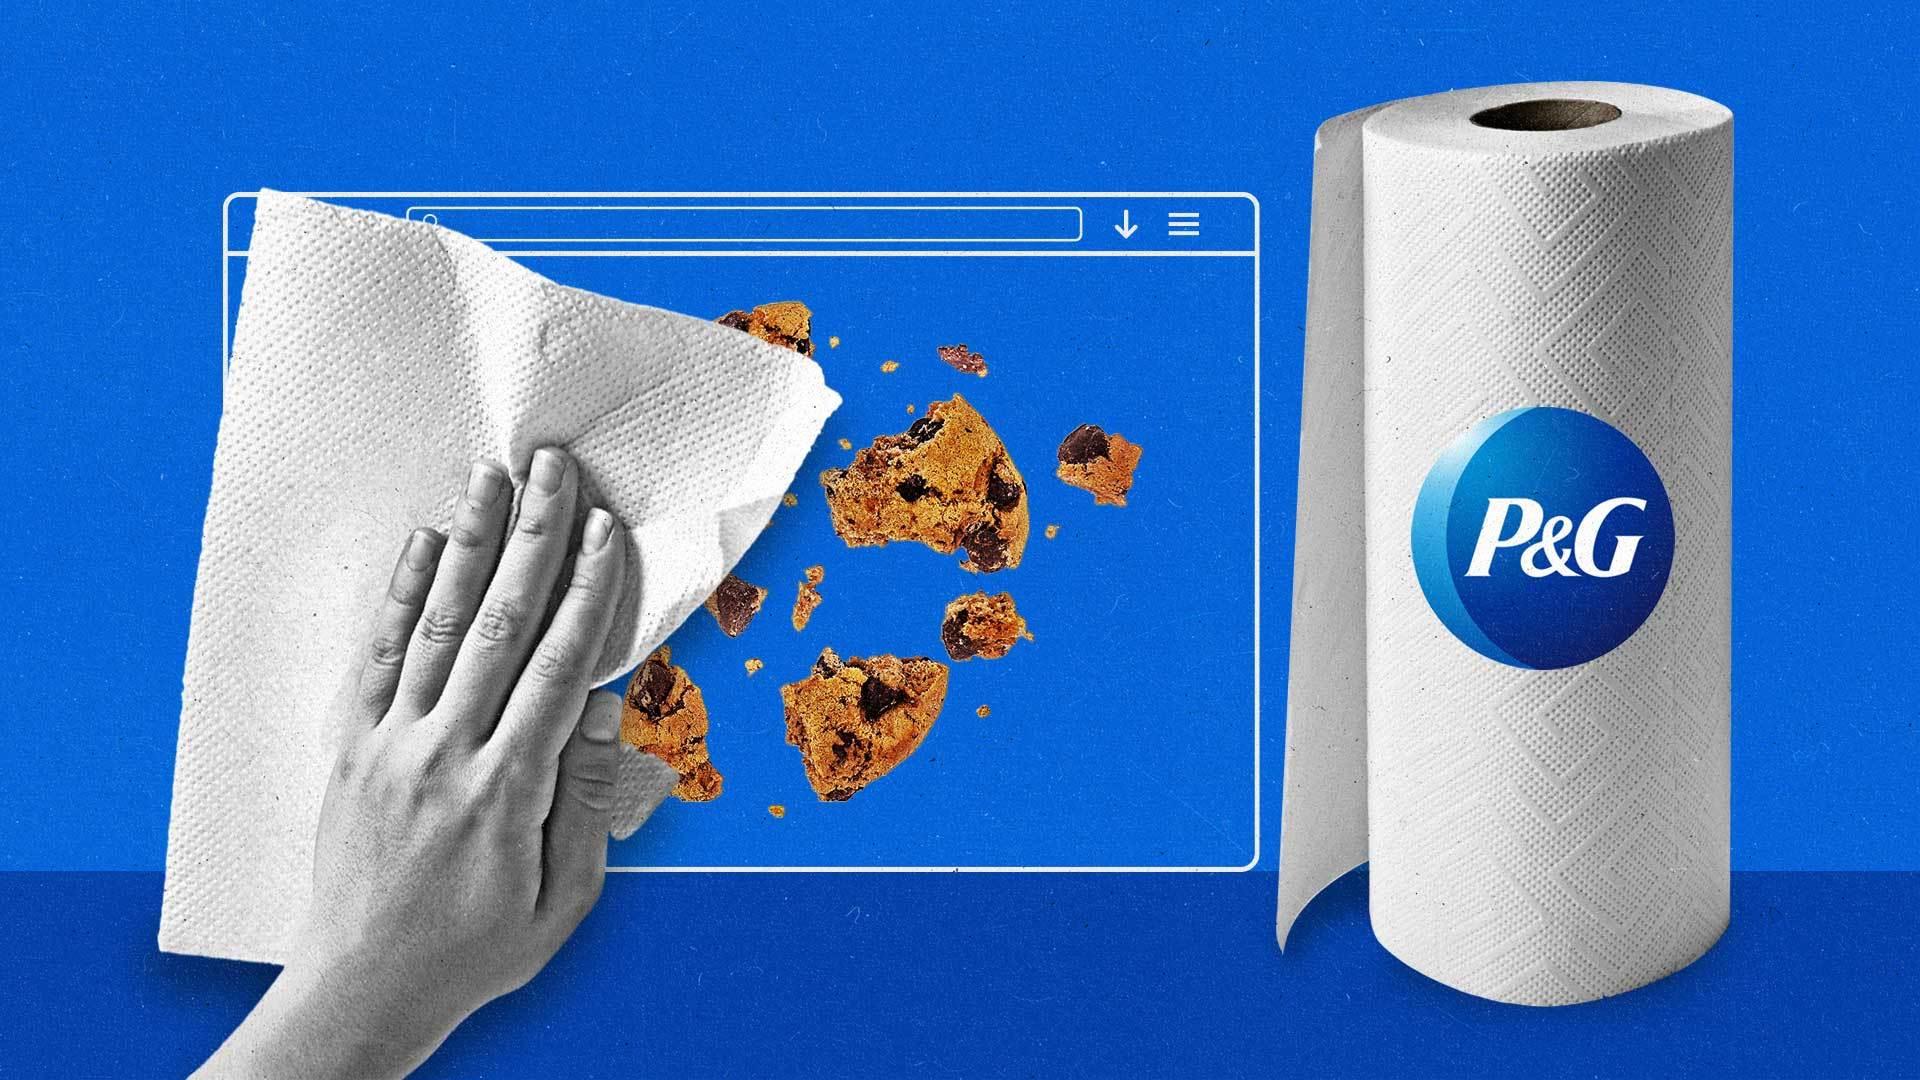 Paper towel roll with P&G logo overlayed next to an internet window with cookie crumbs on it being wiped away.